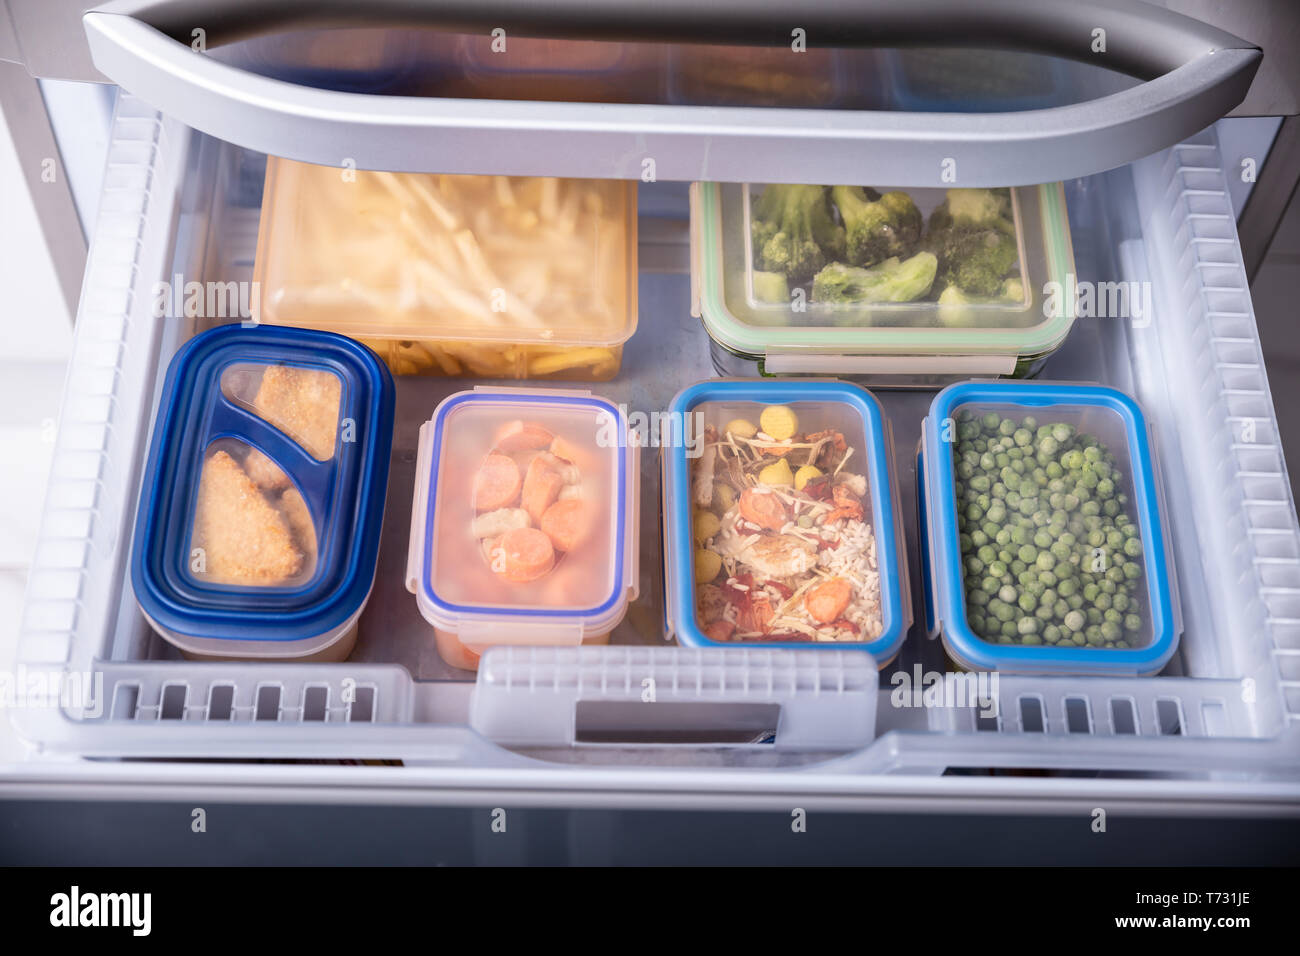 https://c8.alamy.com/comp/T731JE/stacked-of-plastic-containers-with-various-food-store-in-refrigerator-T731JE.jpg